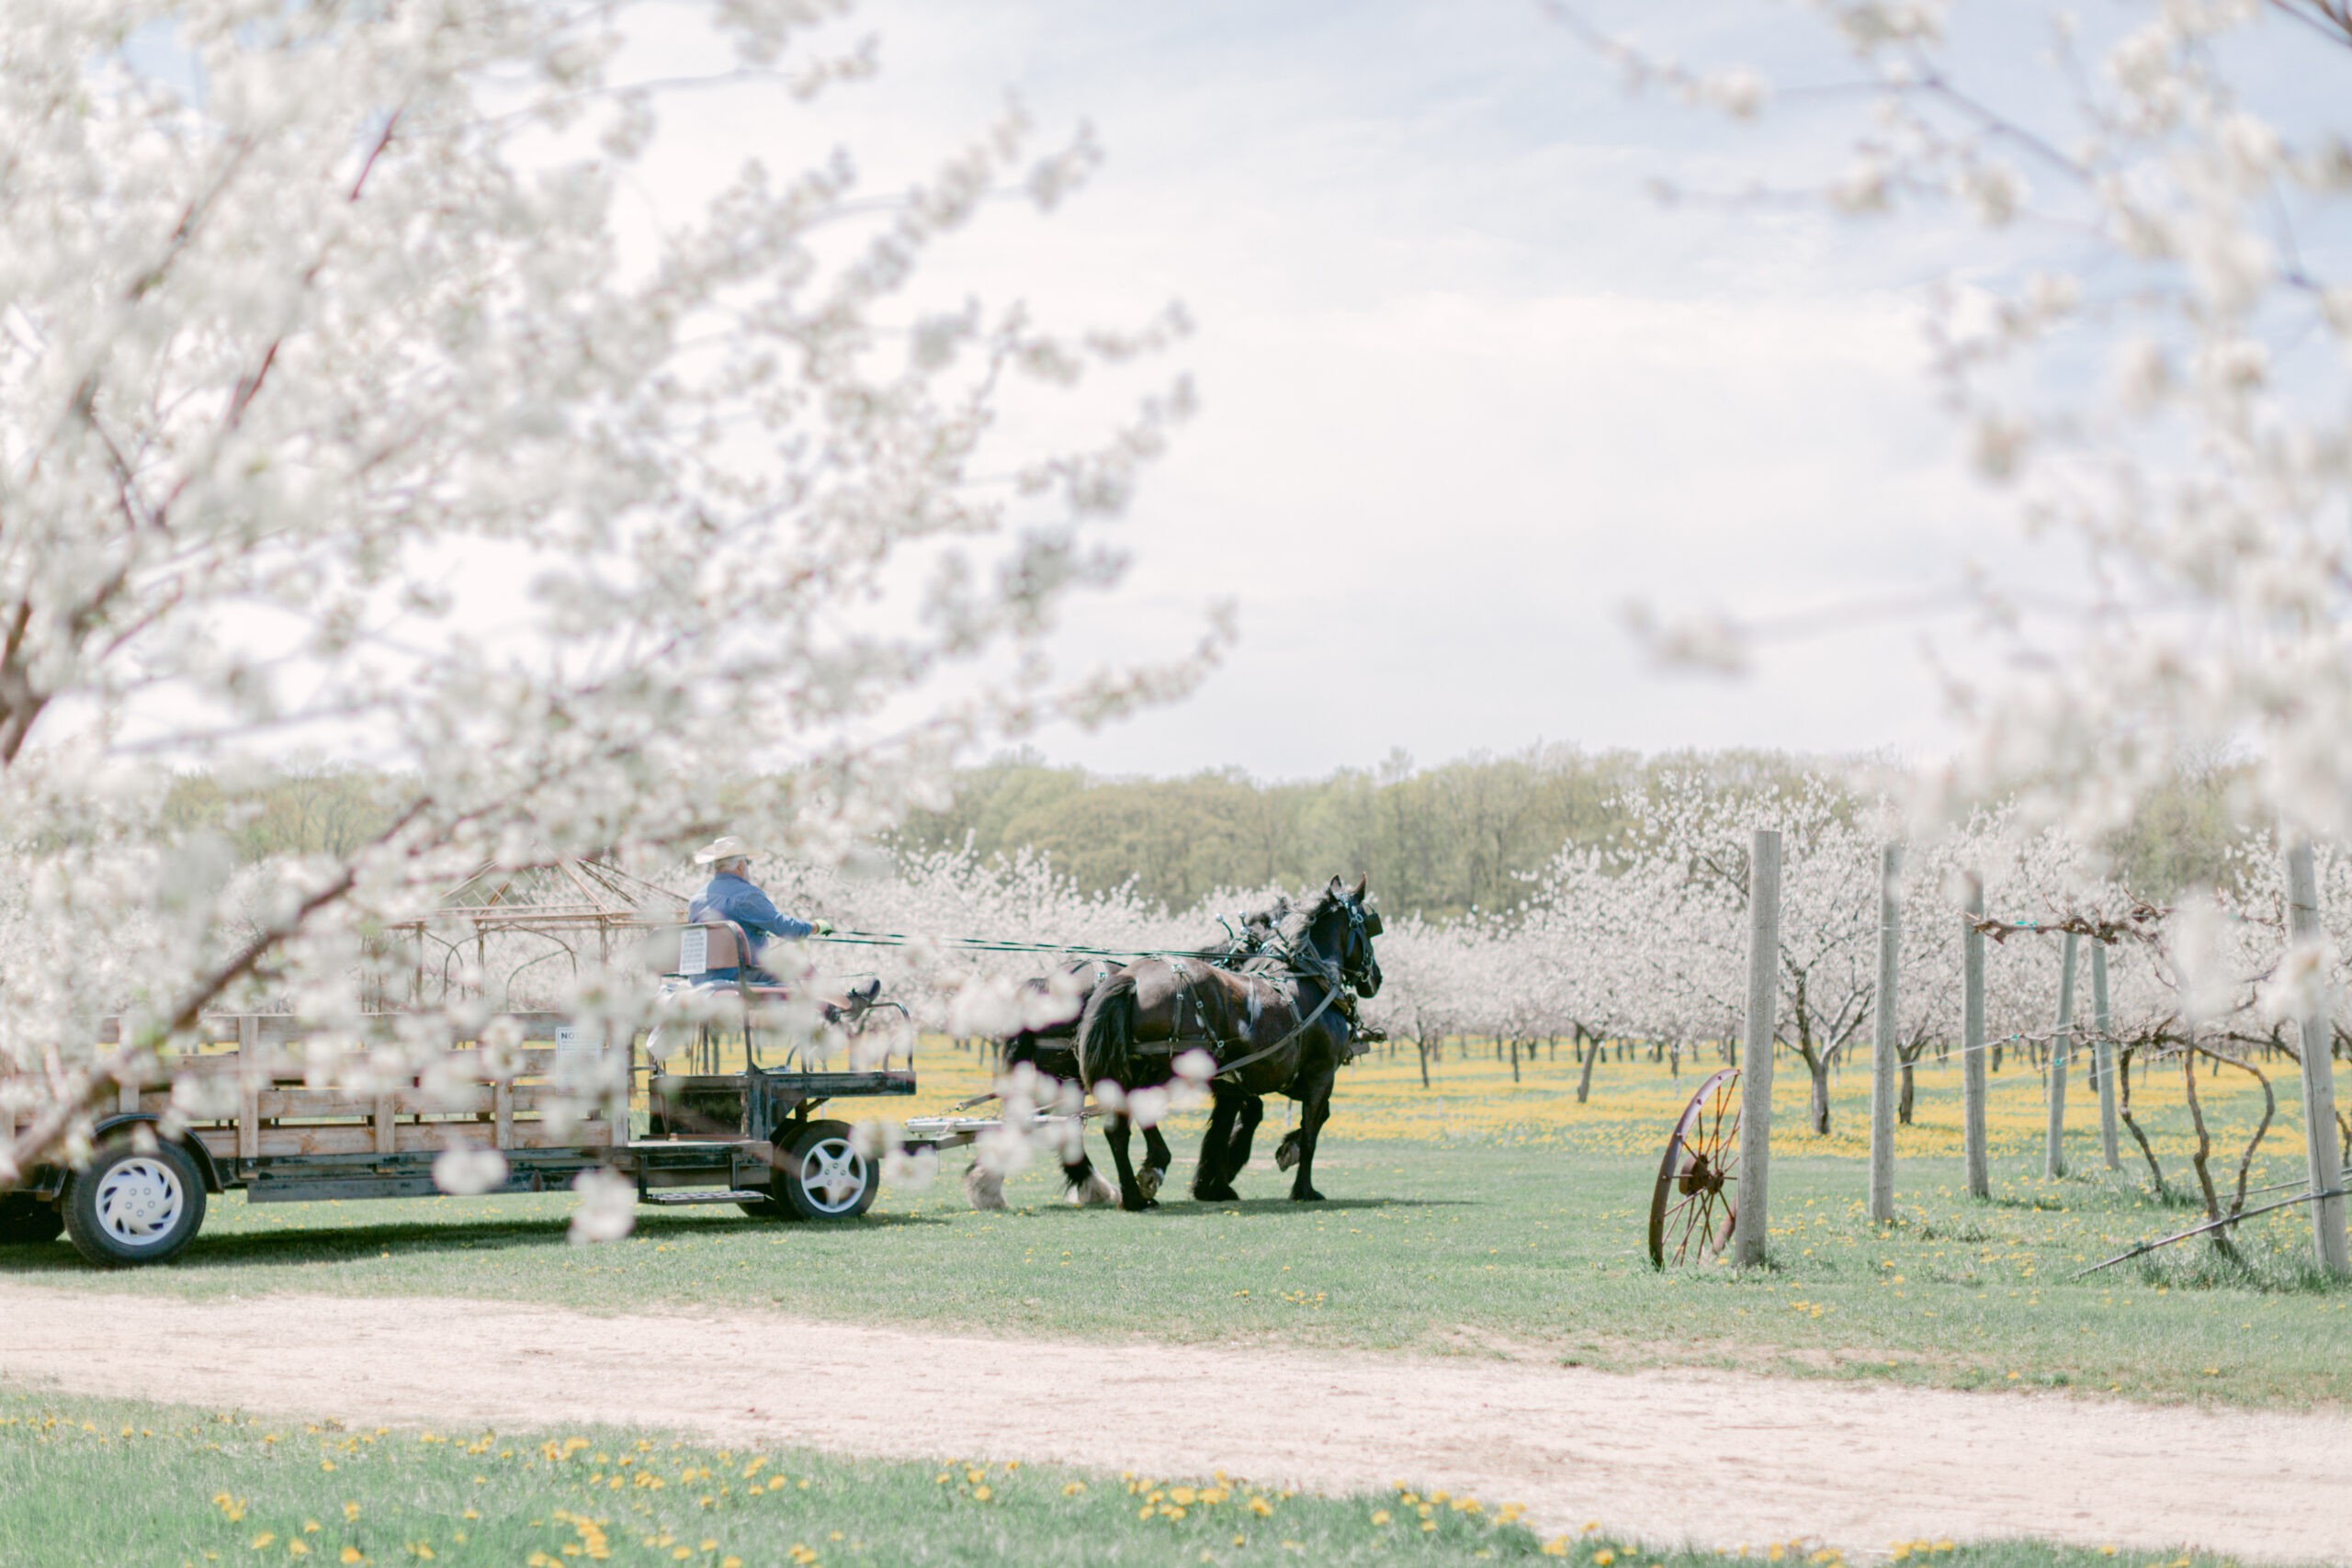 horse-drawn wagon ride at Lautenbach's Orchard Country Winery & Market during cherry blossom peak season in the springtime. Door County Travel Guide